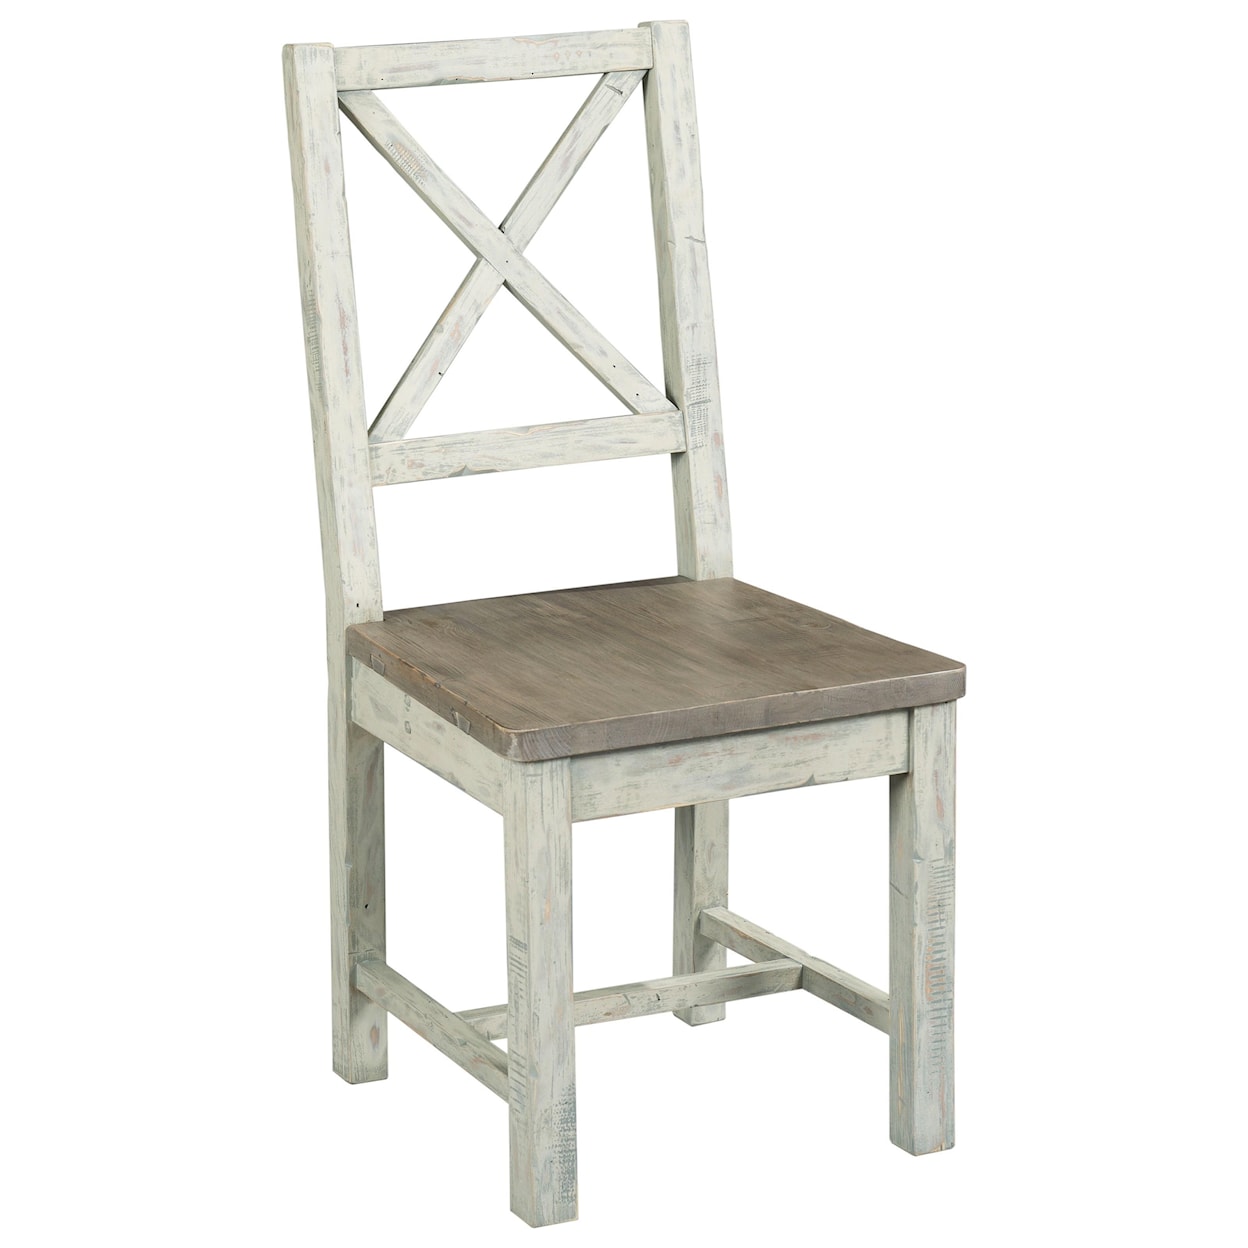 Hammary Reclamation Place Desk Chair